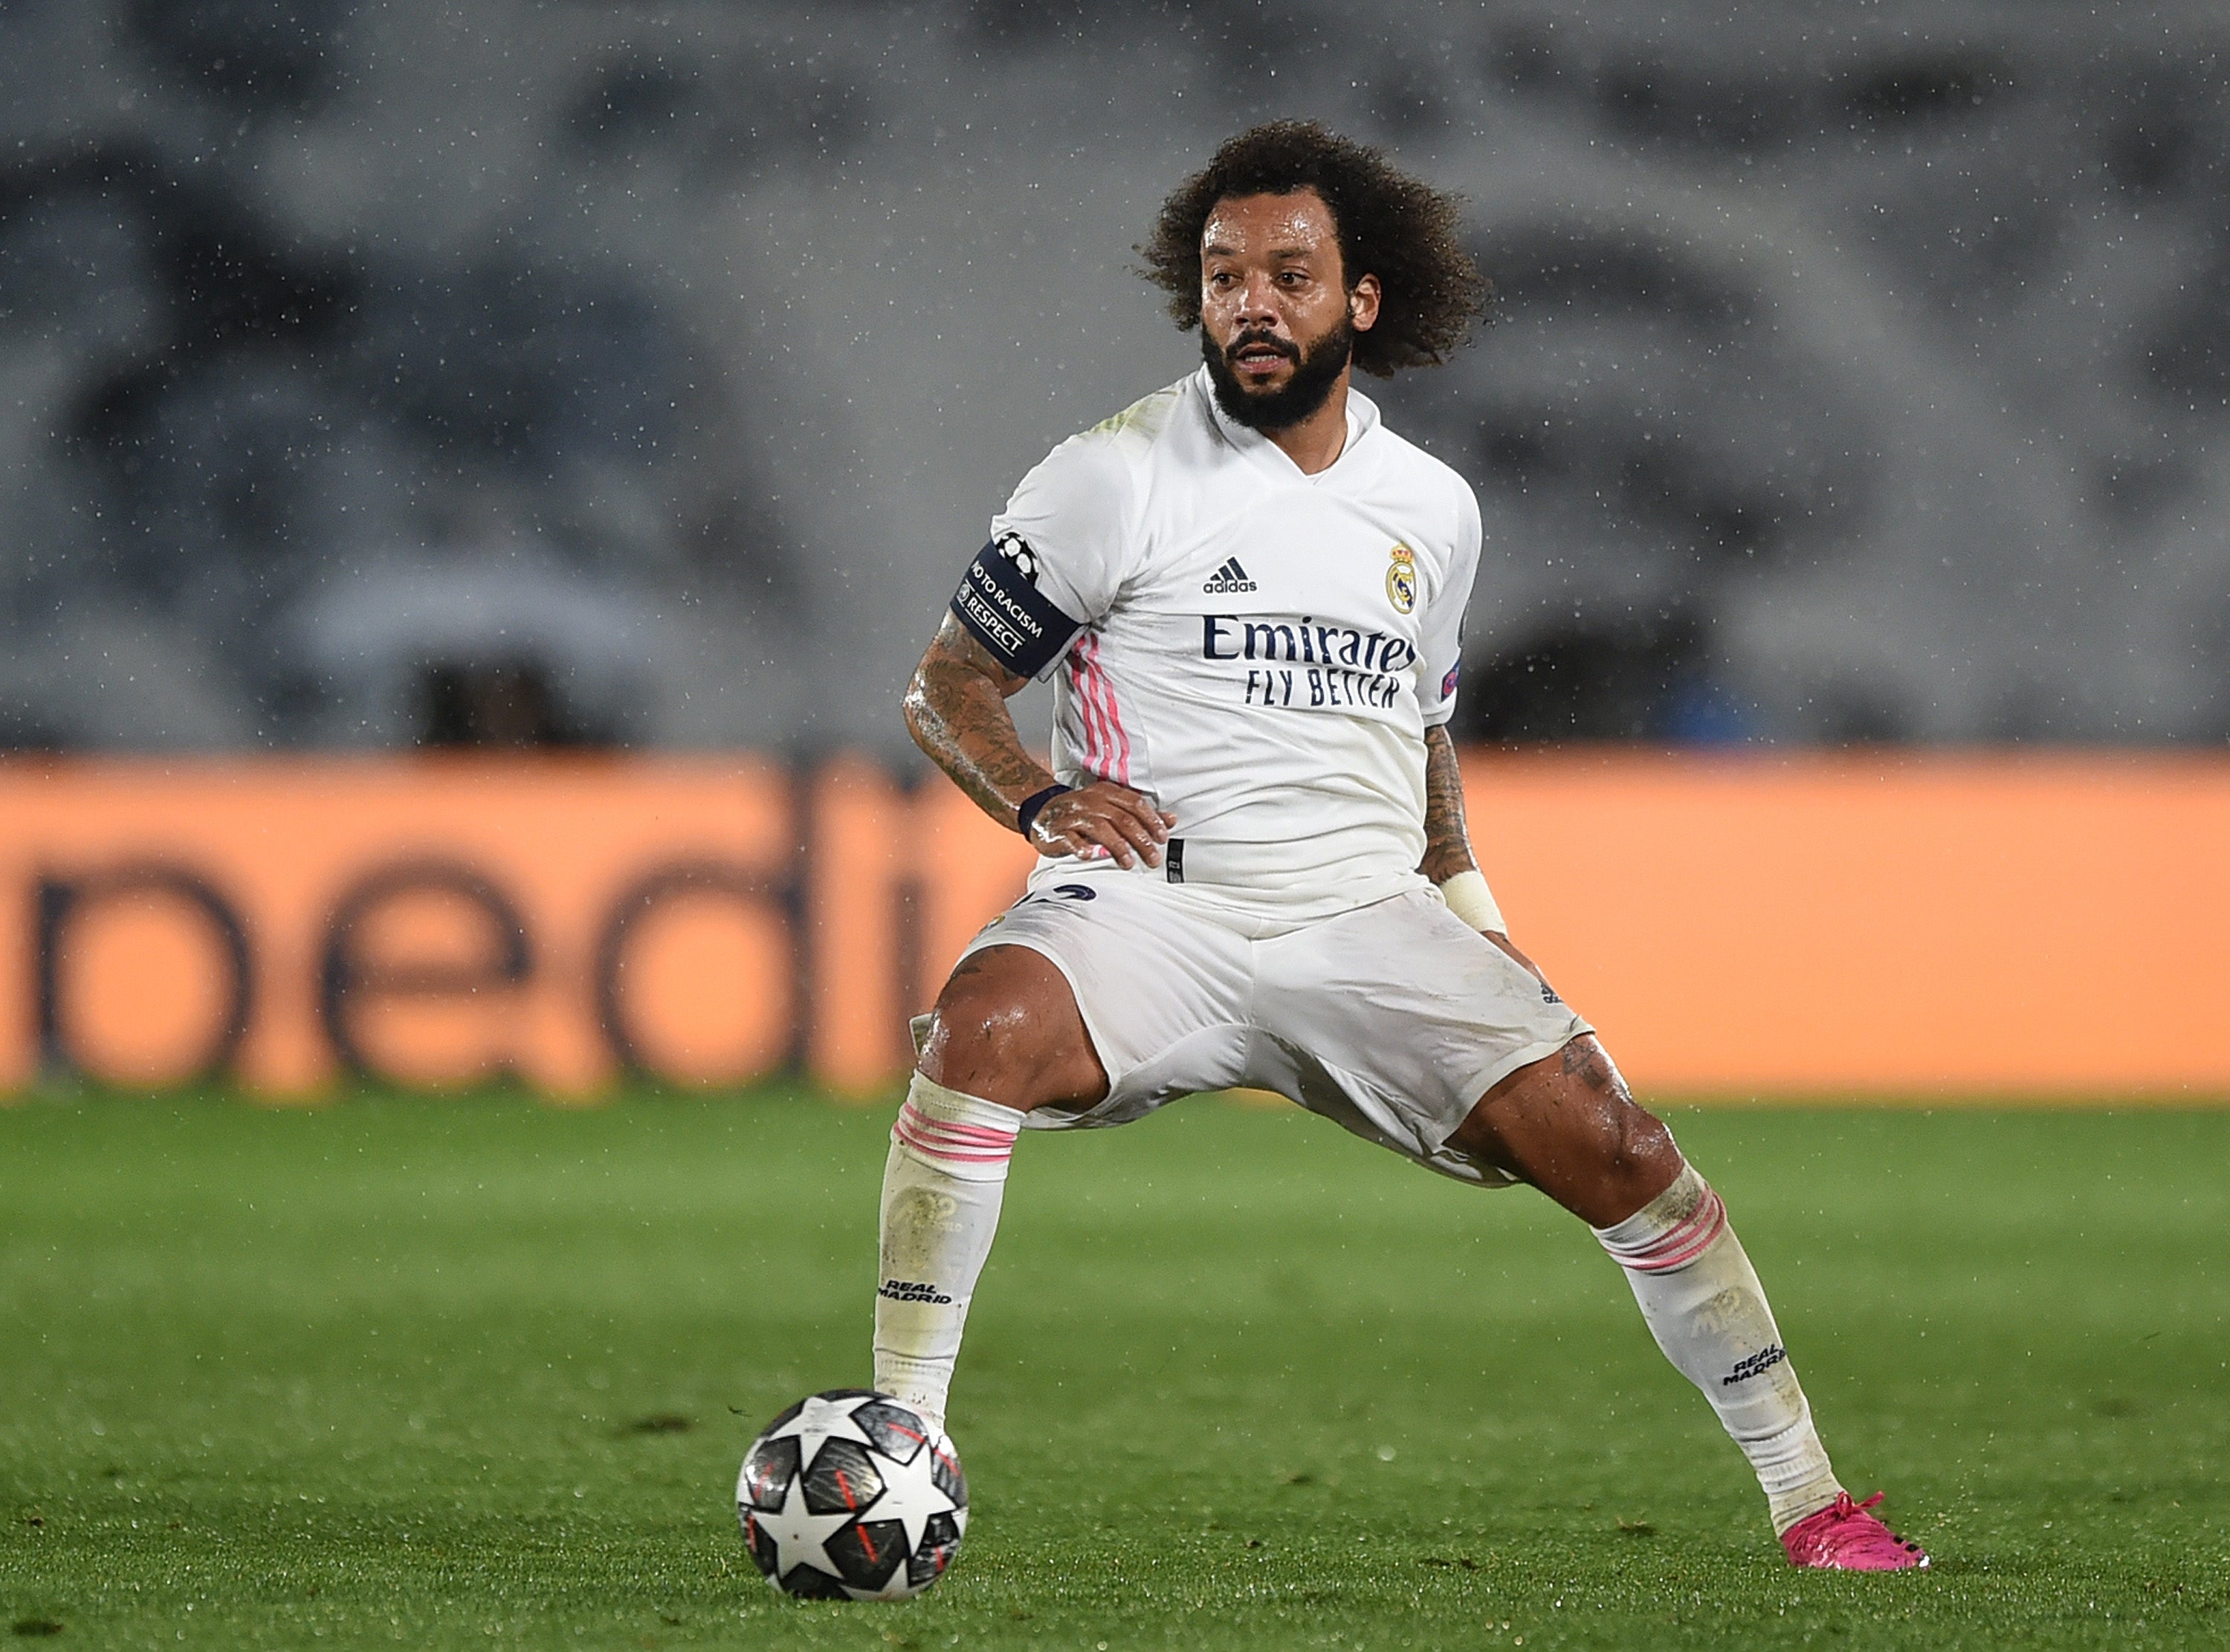 Marcelo of Real Madrid controls the ball against Chelsea